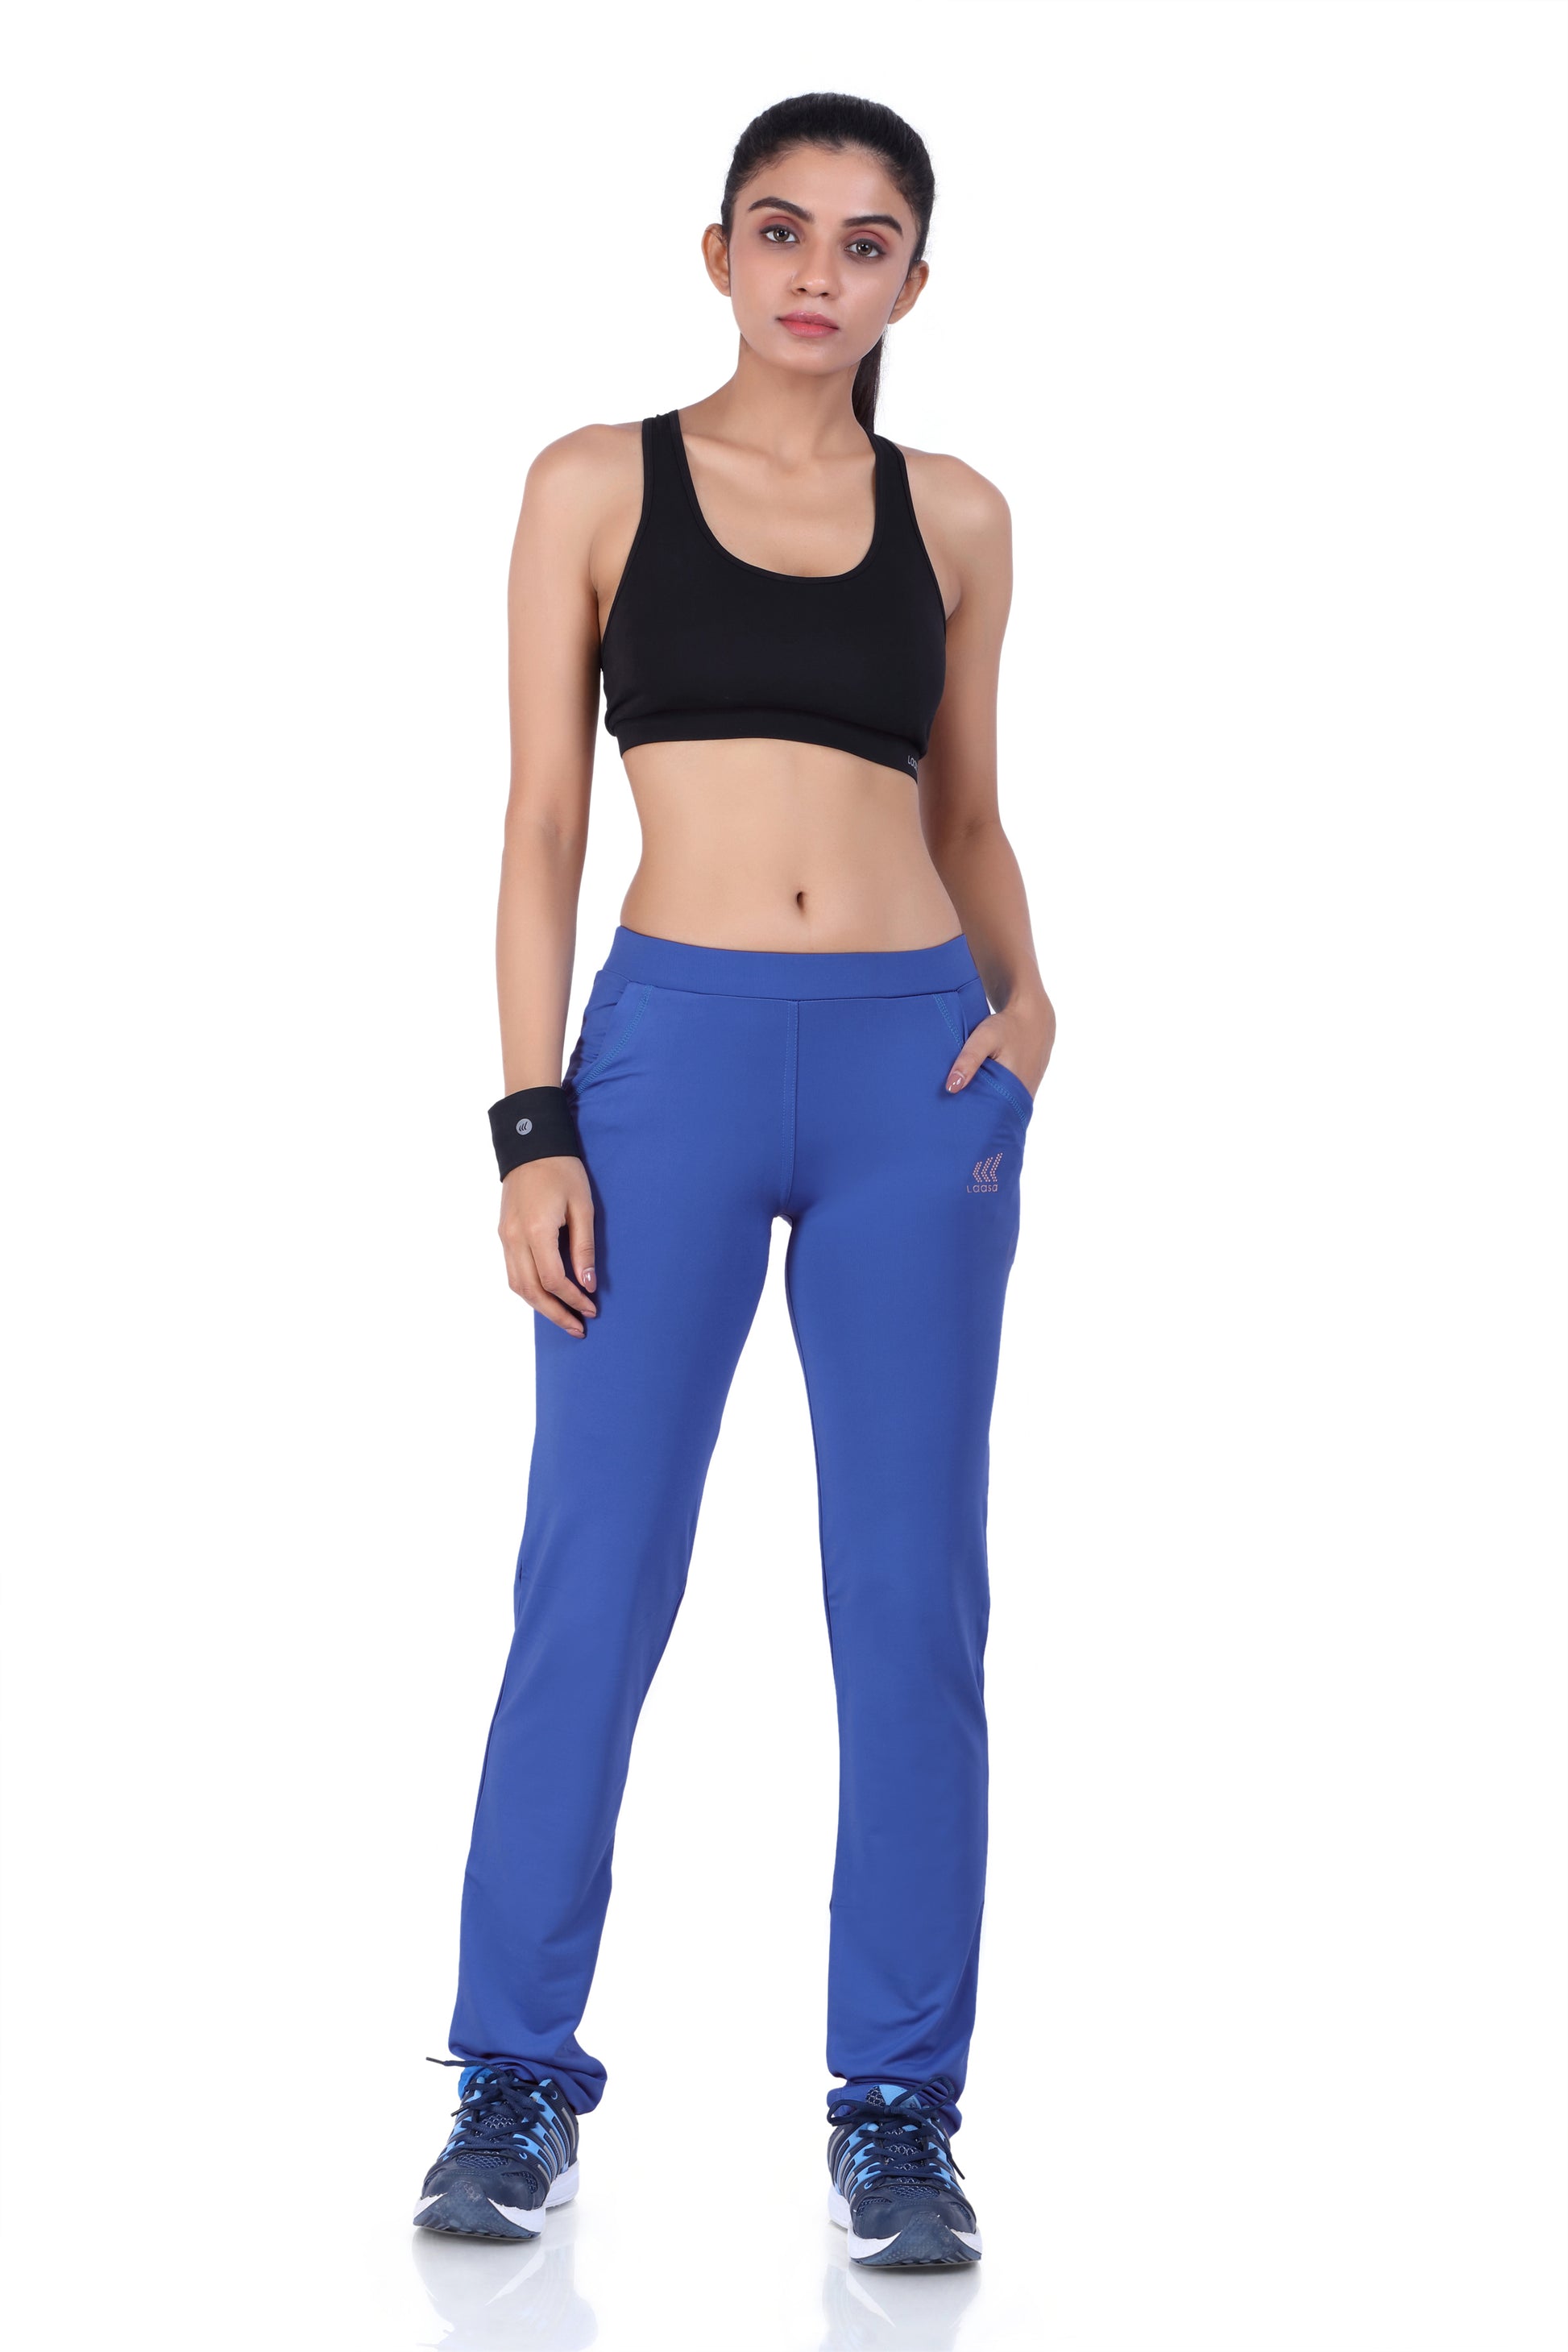 Laasa Sports Athleisure Sports Track Pant - Royal Blue for Women